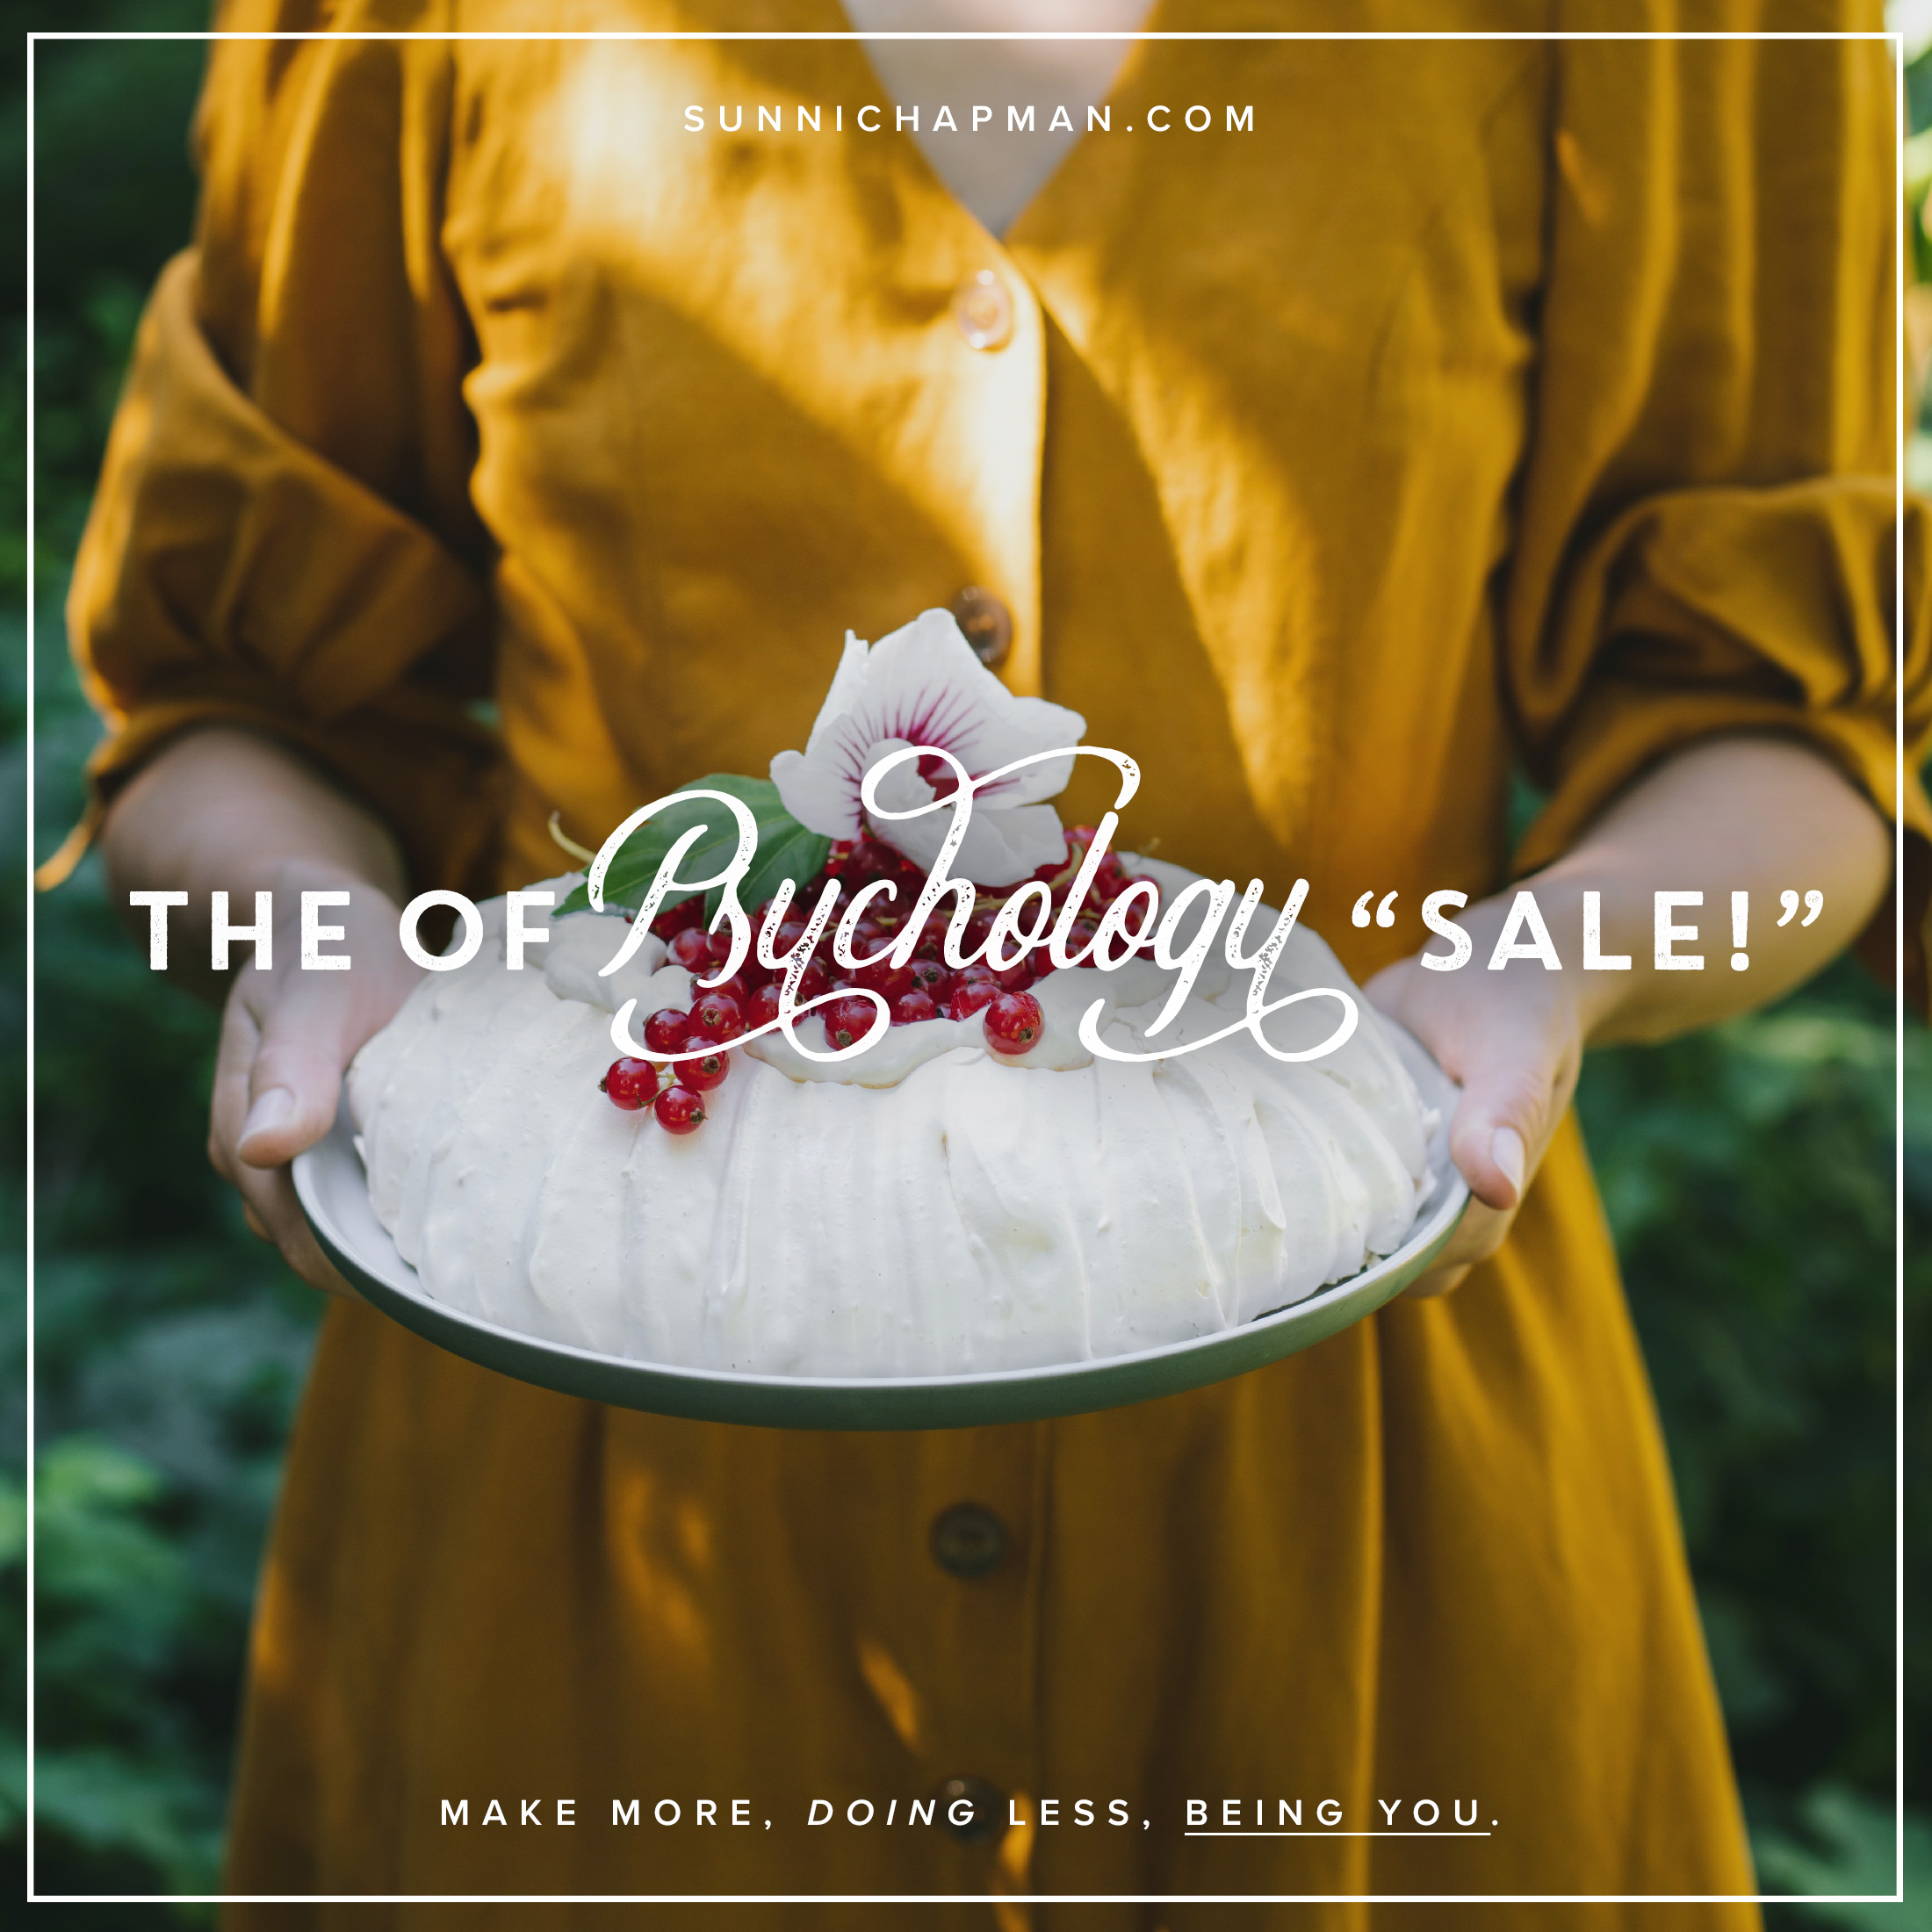 woman in orange dress holding cake with the text over the image: The Psychology Of “Sale!” 